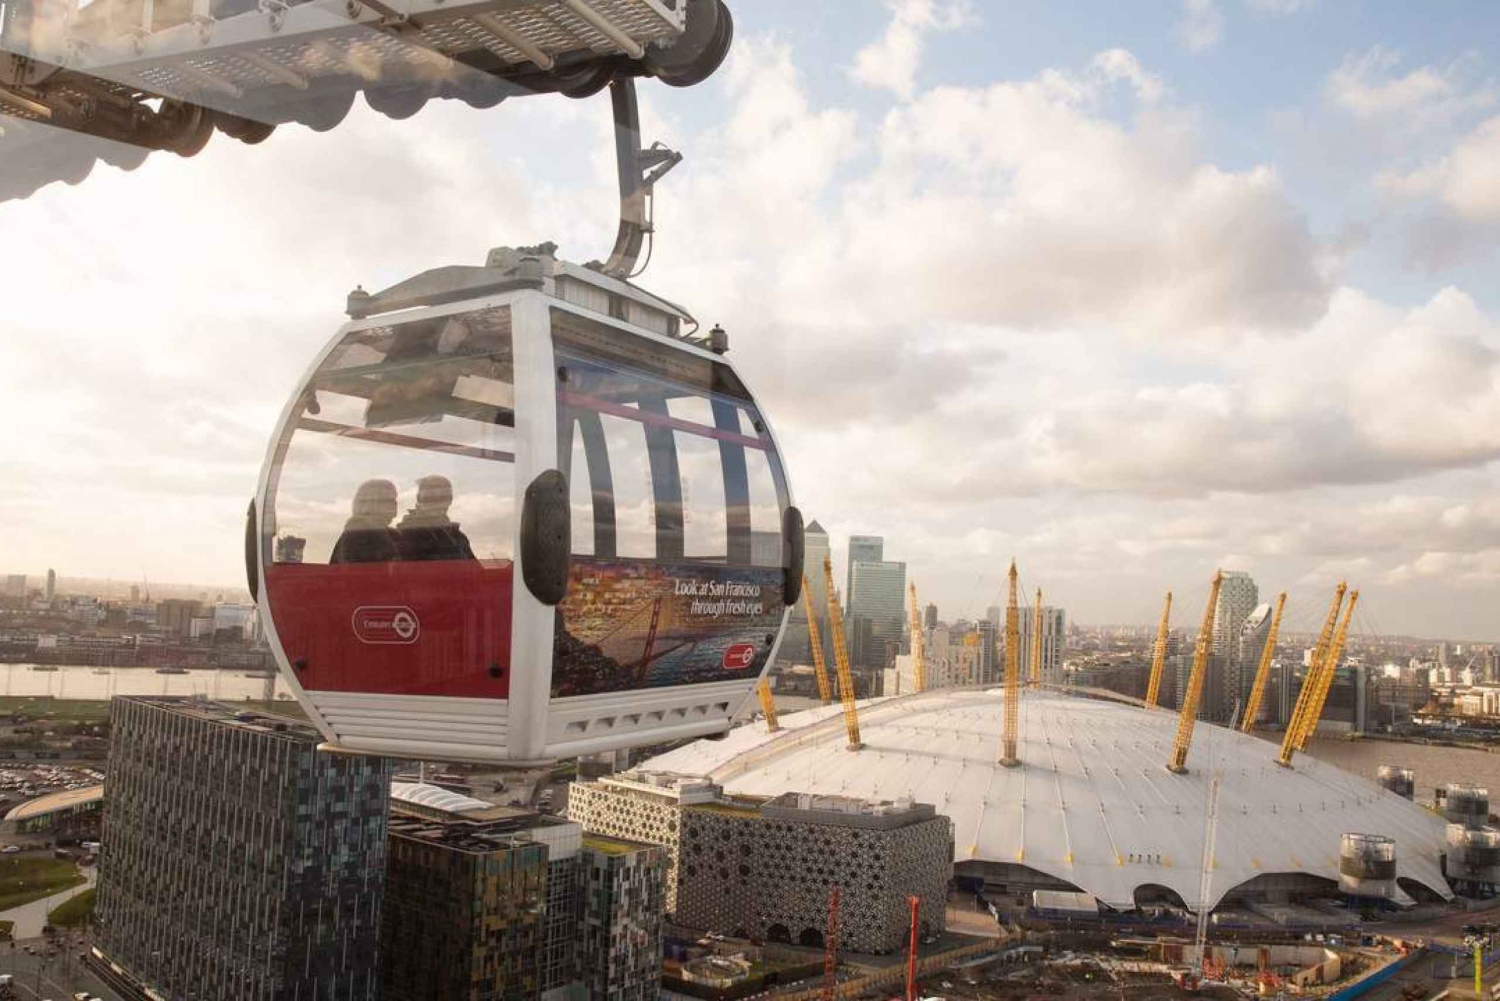 London: Westminster Tour, Climb The O2 Arena, and Cable Car